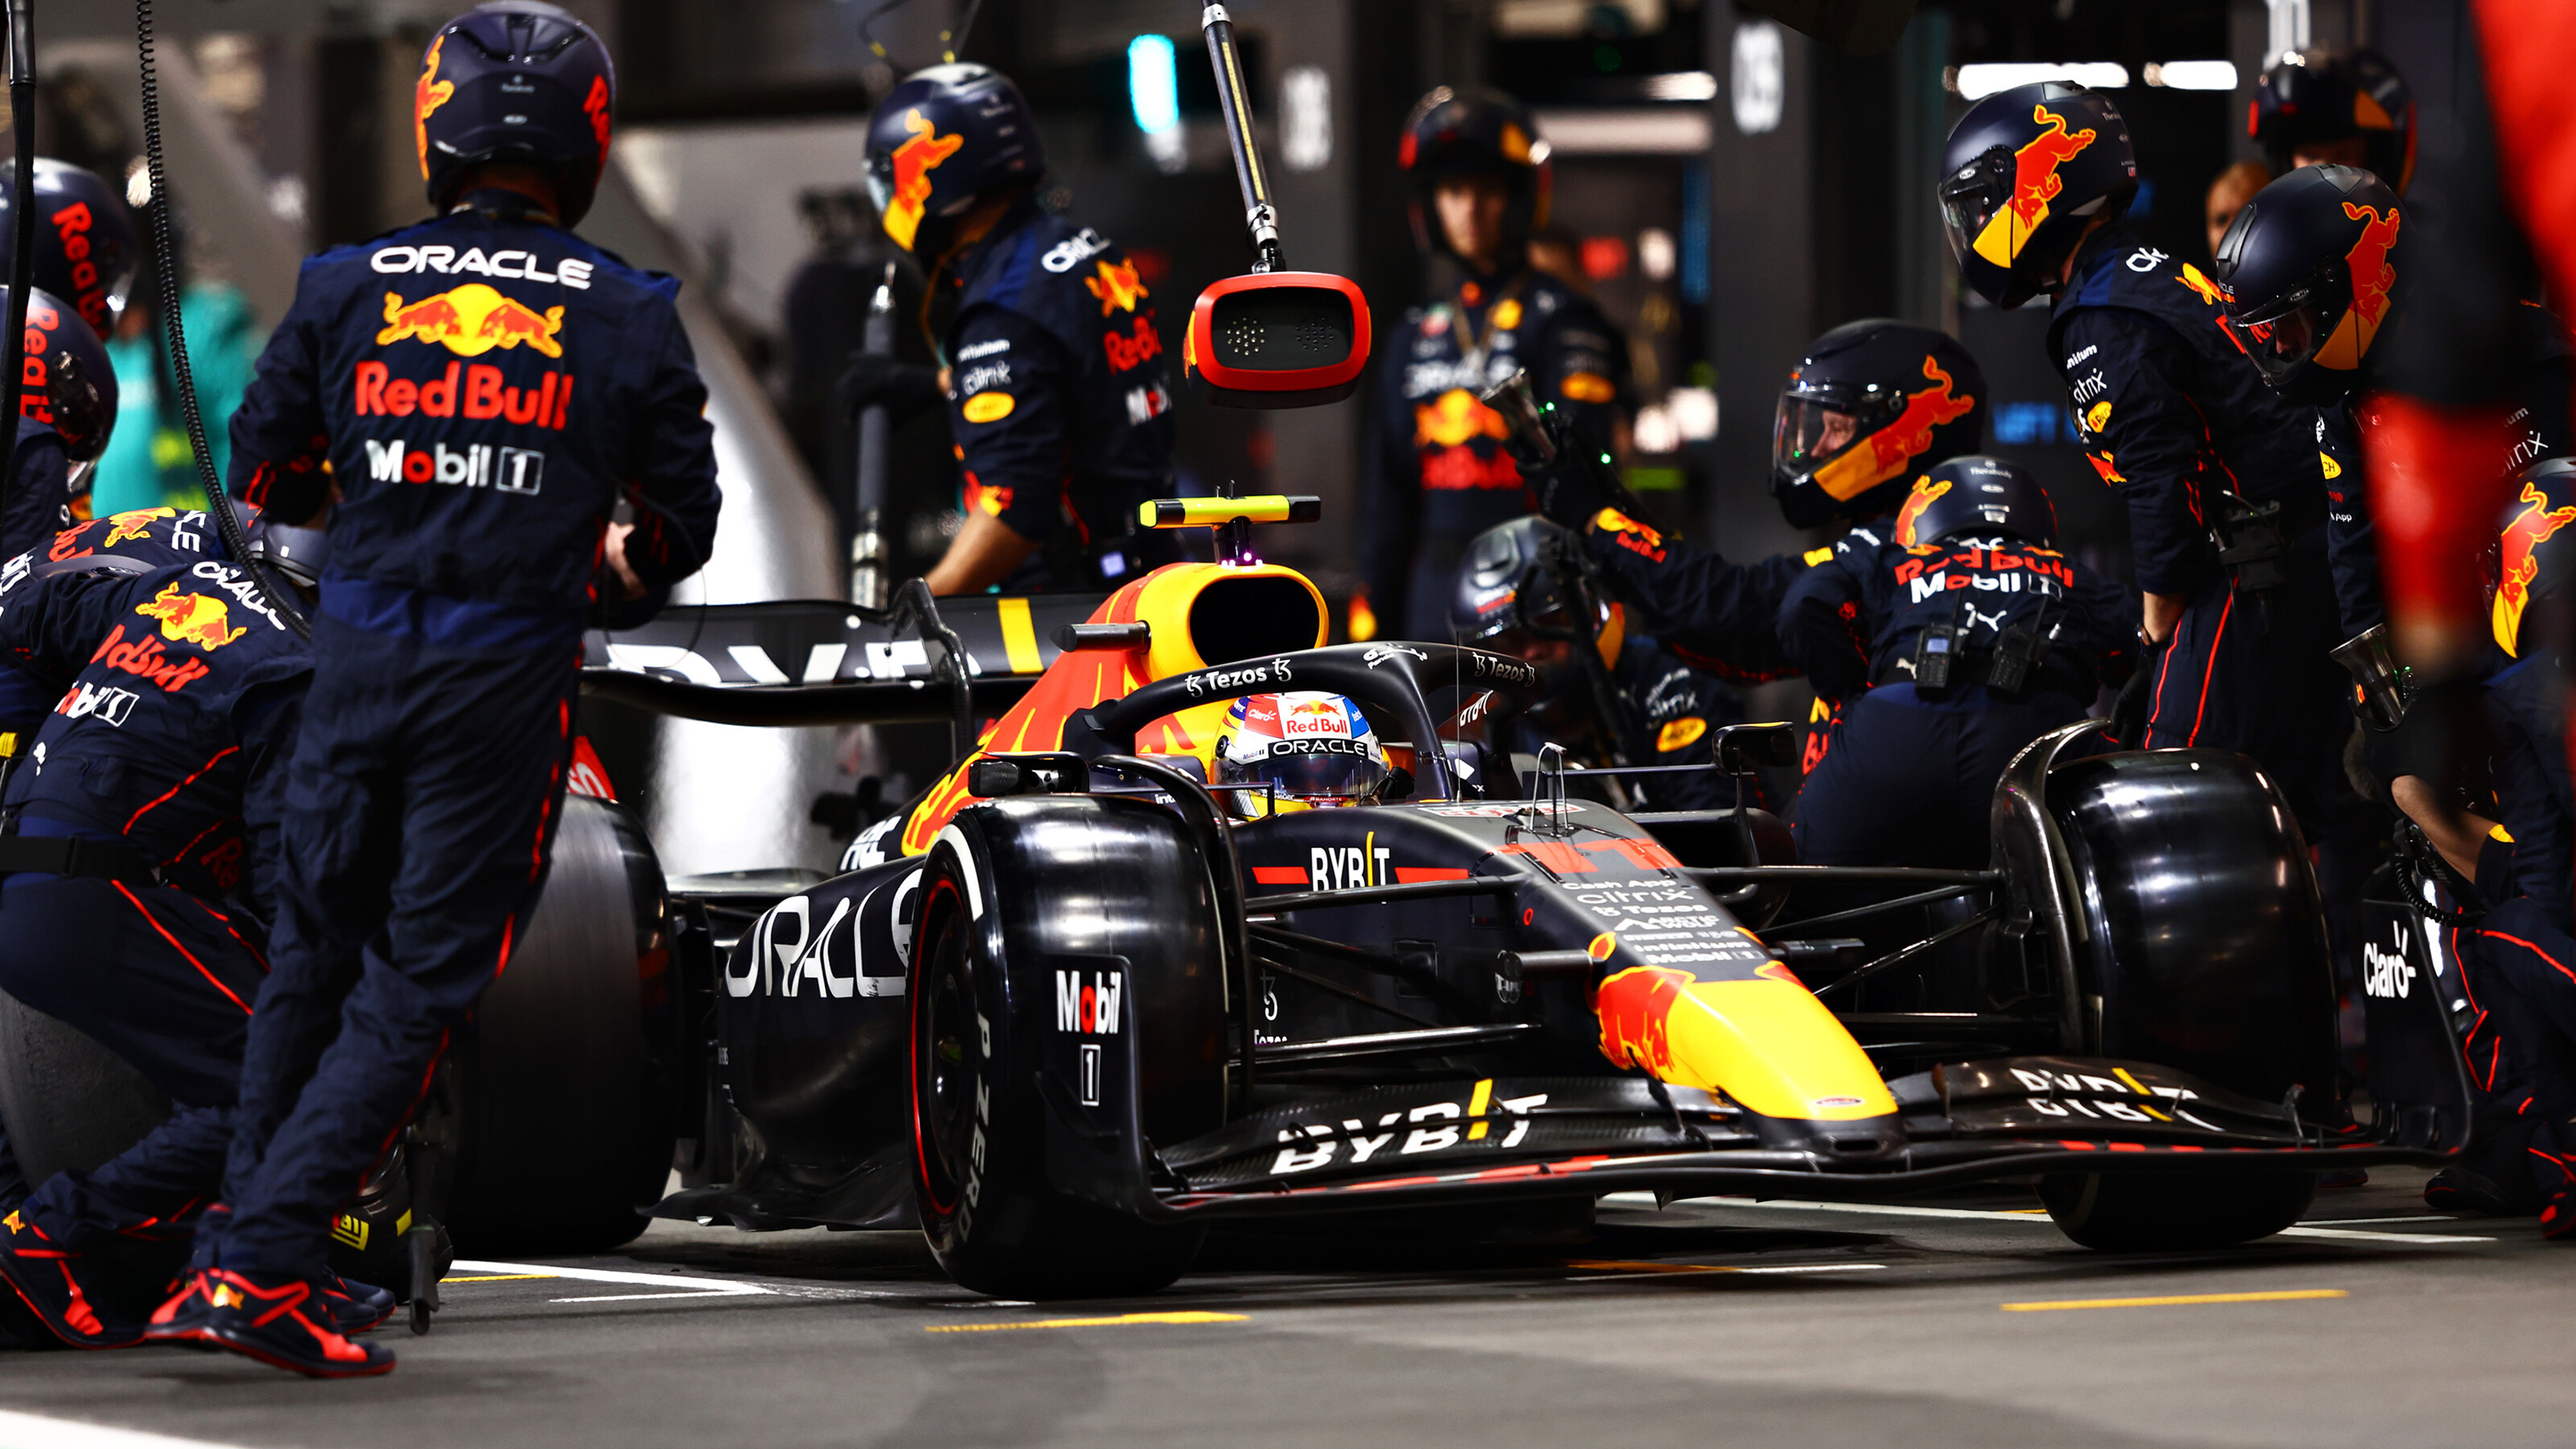 Image The 2022 F1 season has seen a raft of new rules introduced which has resulted in a completely new look and feel for the cars. To find out more about the Oracle Red Bull Racing’s RB18, click here to view the launch.